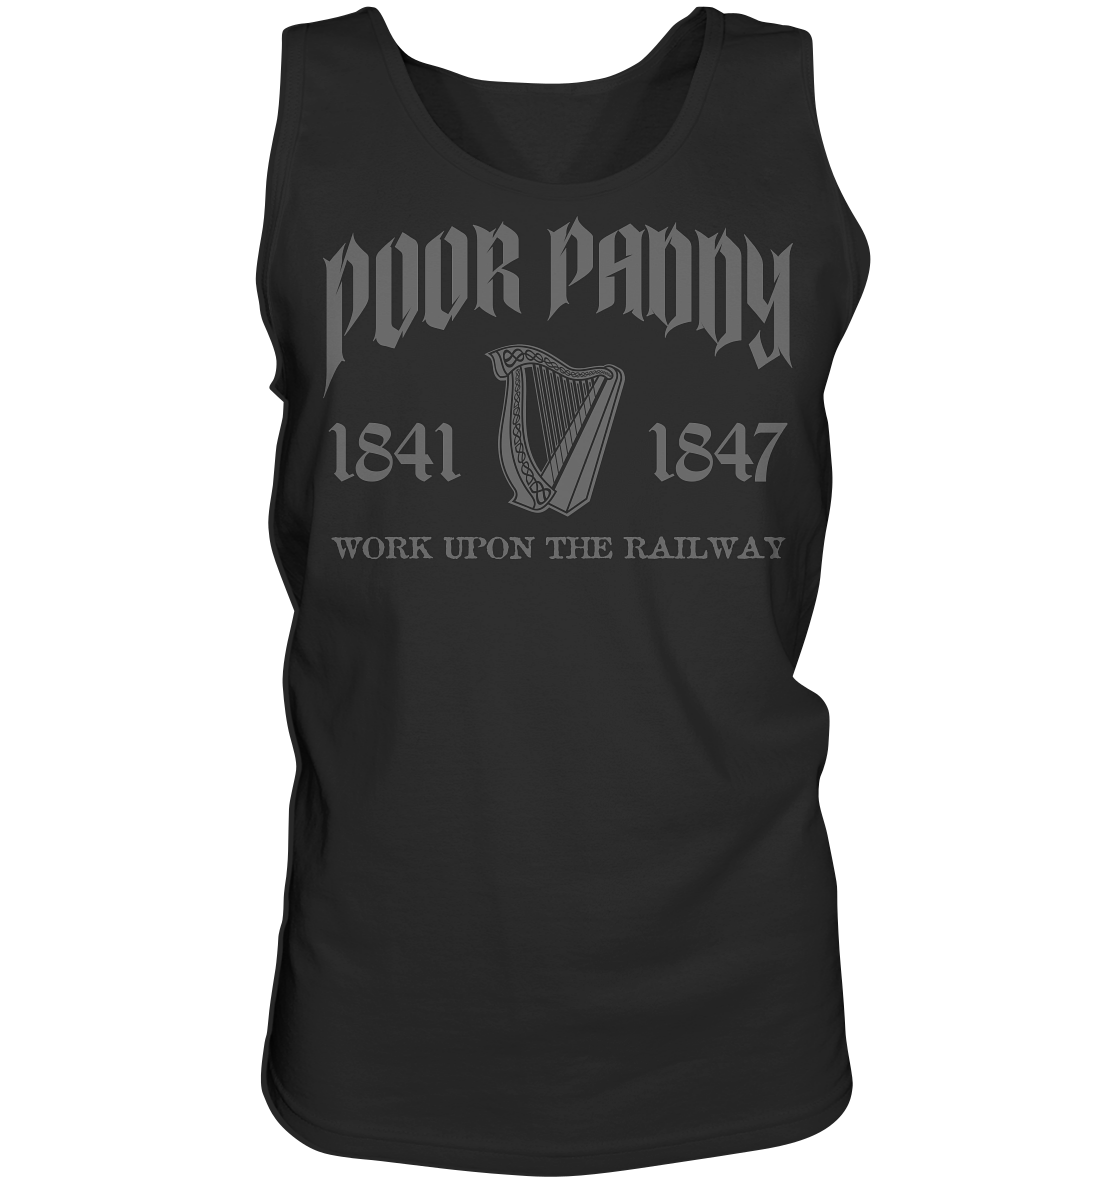 Poor Paddy "Work Upon The Railway" - Tank-Top